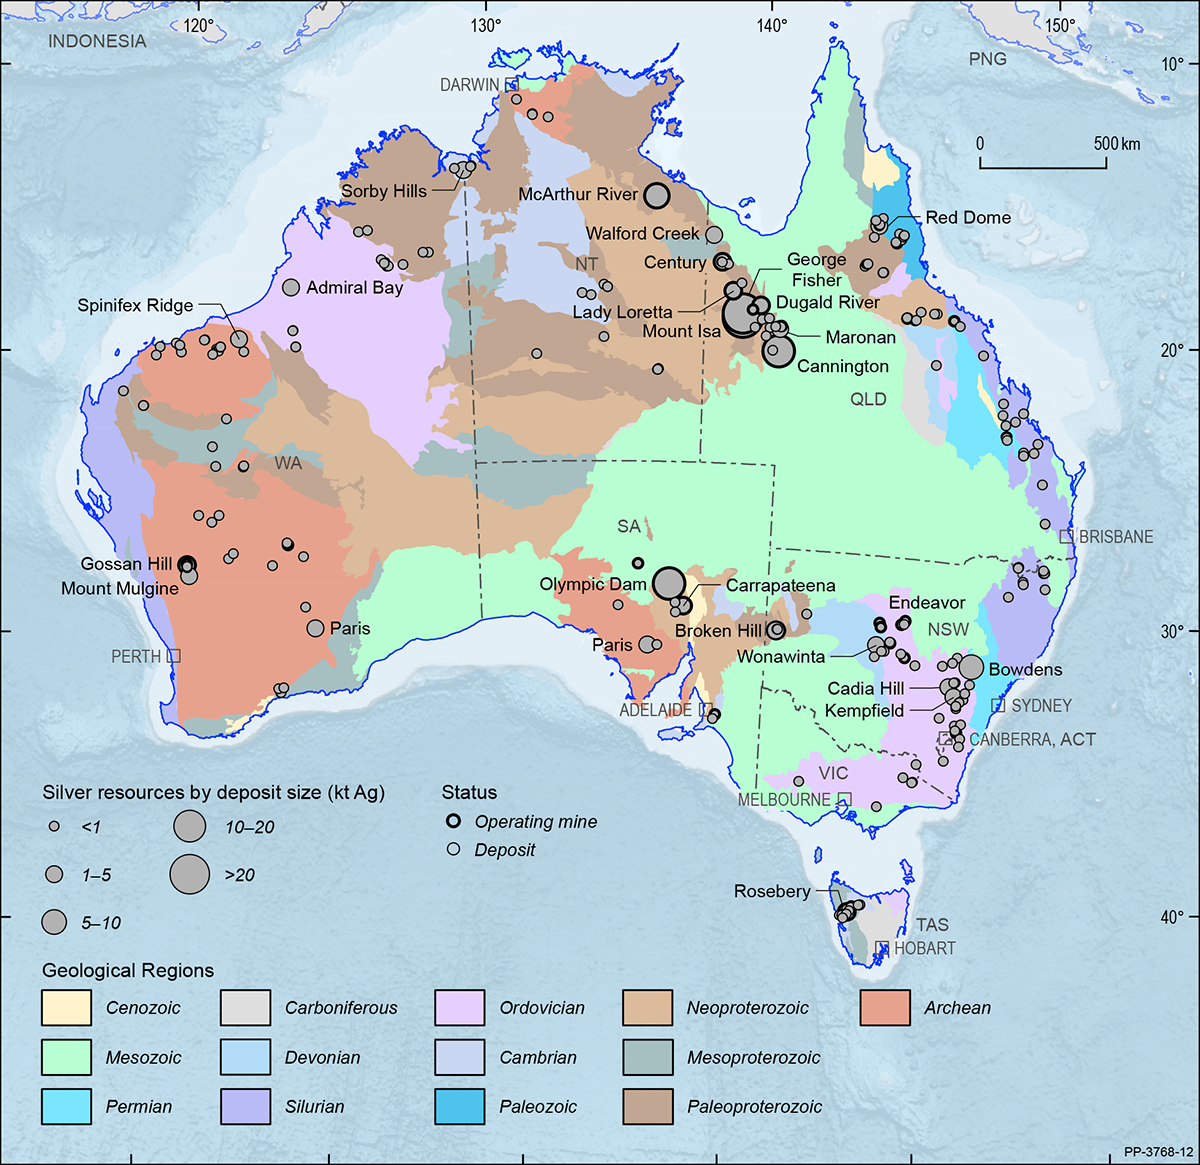 A map showing the Australian continent shaded by the ages of the main geological provinces highlighting the geographical distribution of Australian silver deposits and operating mines in 2019.